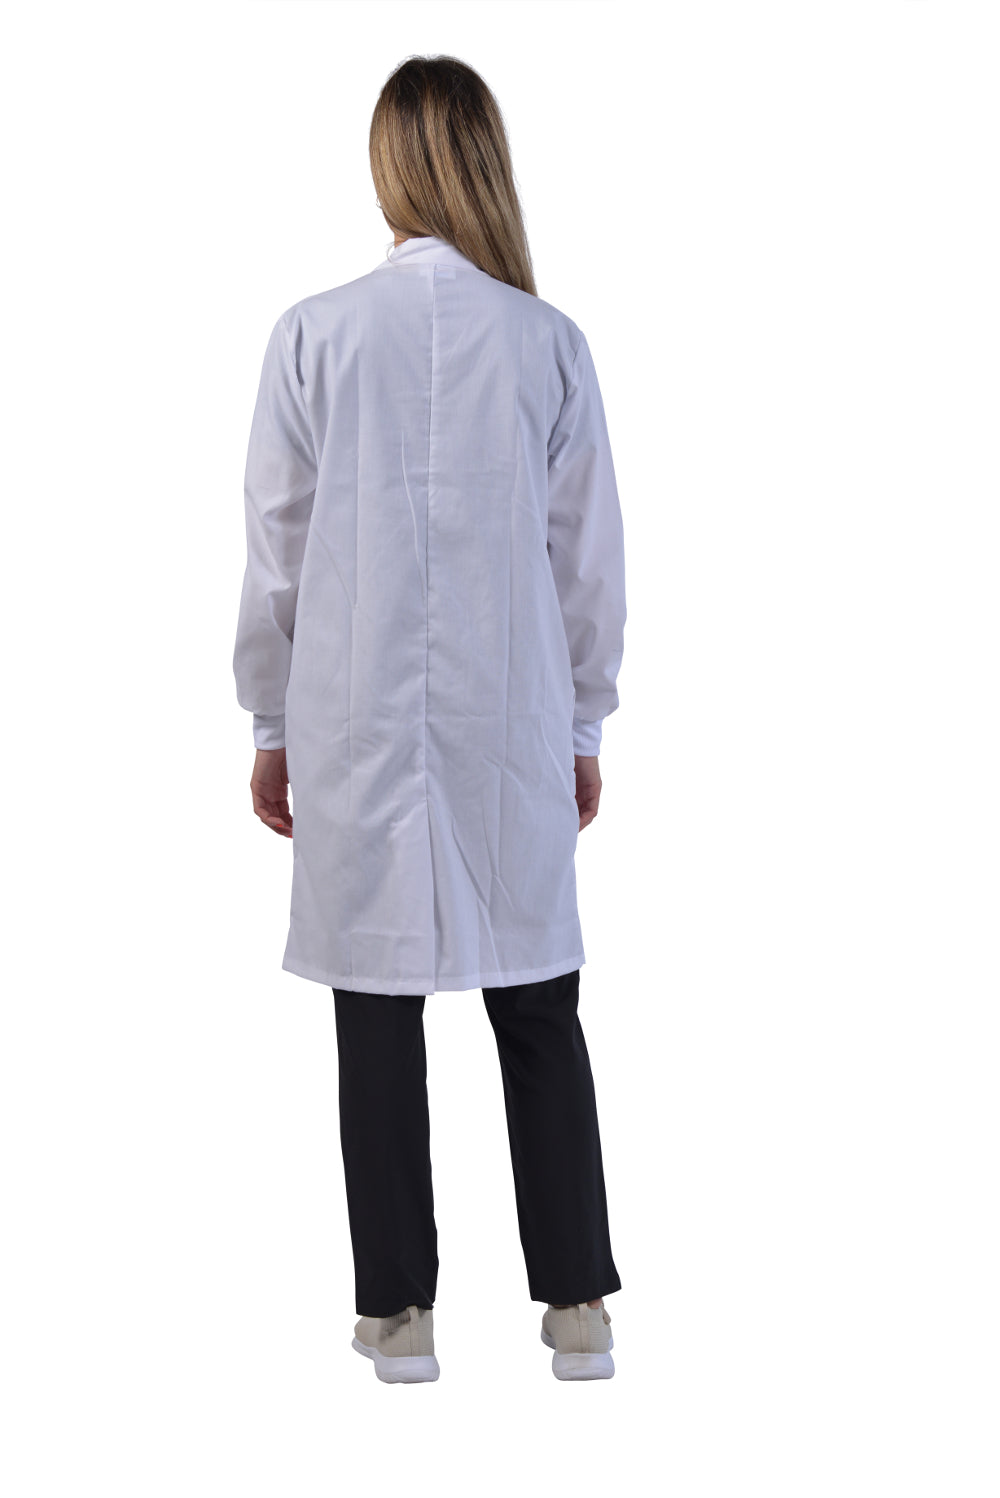 White - Avida Lab Coats 42" Unisex Lab Coat with Knit Cuffs (CLEARANCE)